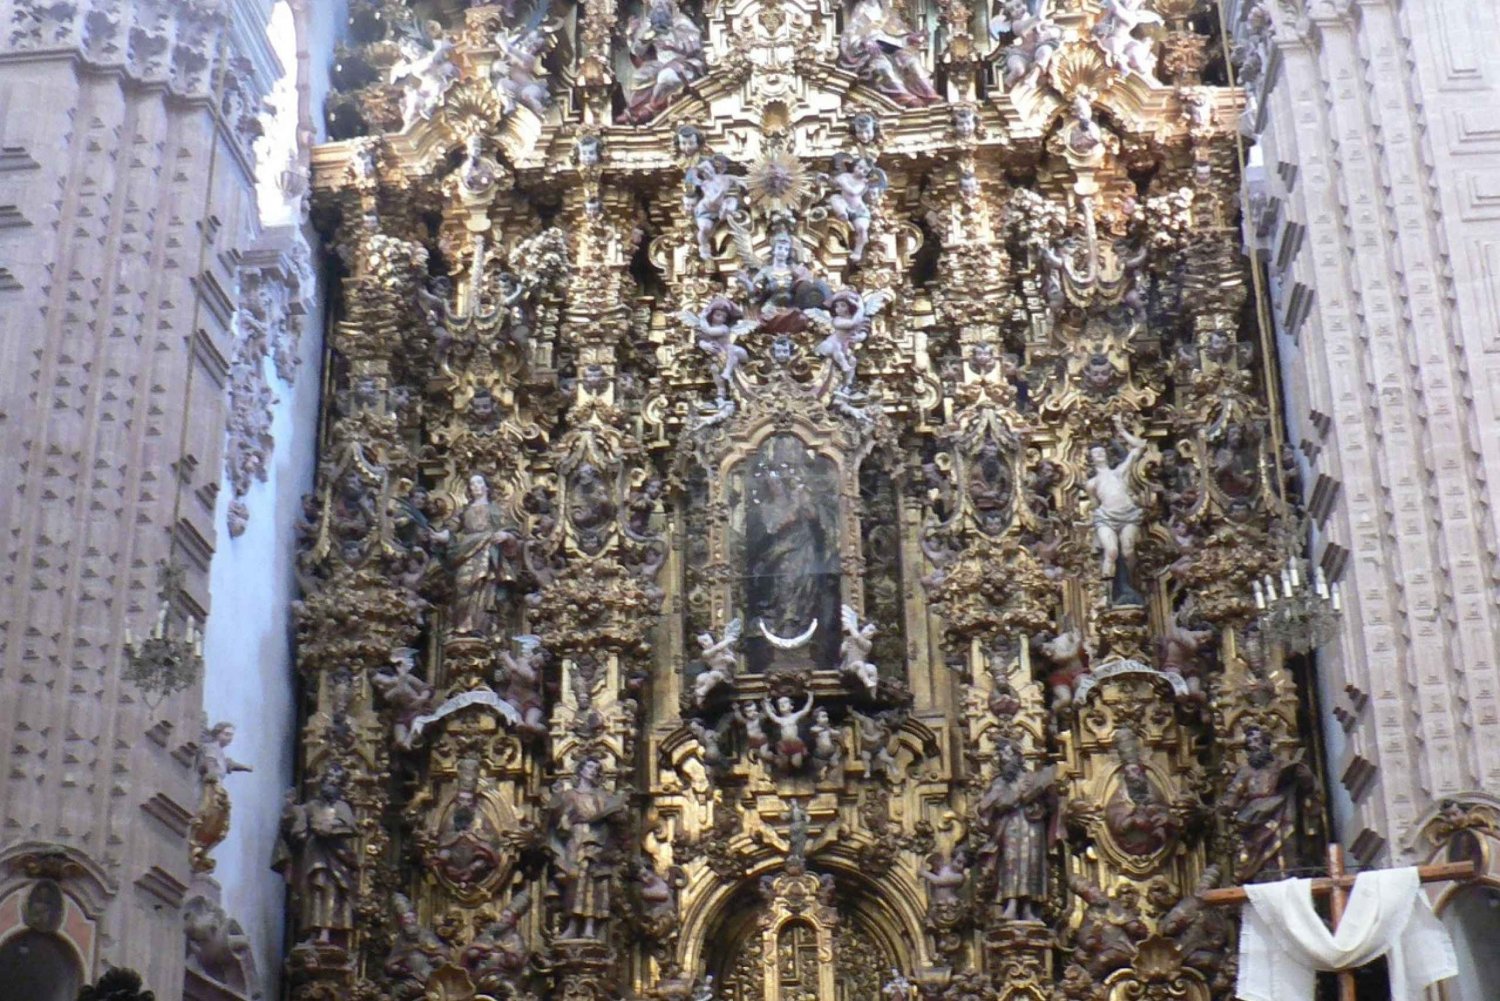 From Mexico City: Taxco and Cuernavaca by van